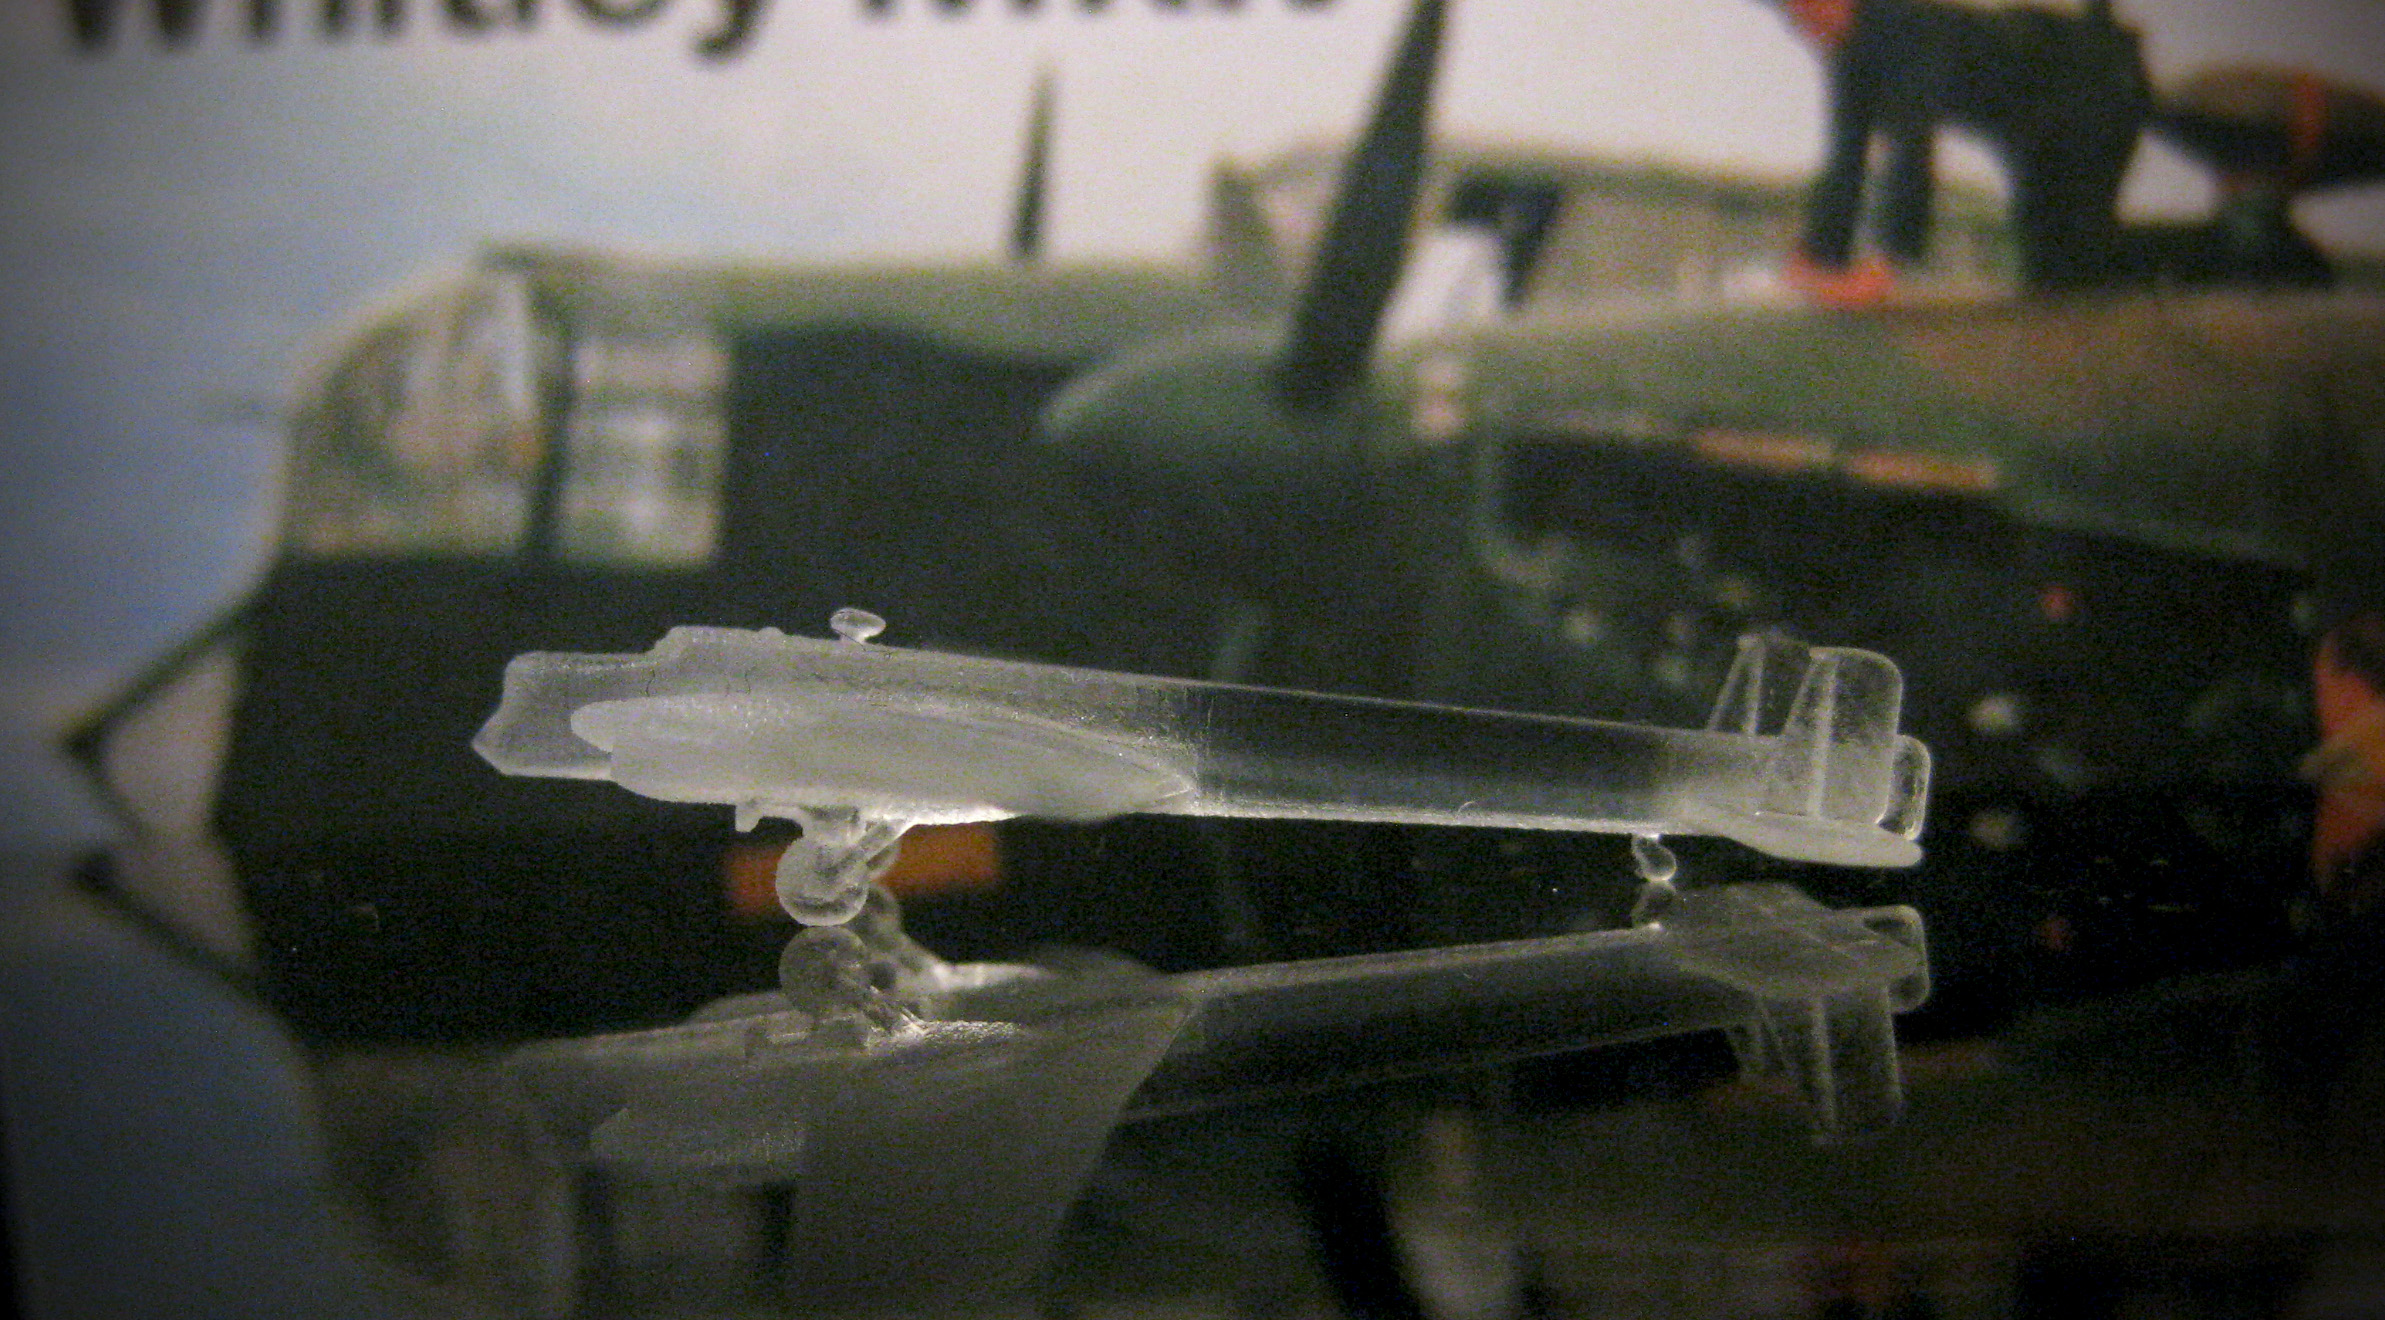 1/700 Armstrong Whitworth Whitley w/gear down (x2)